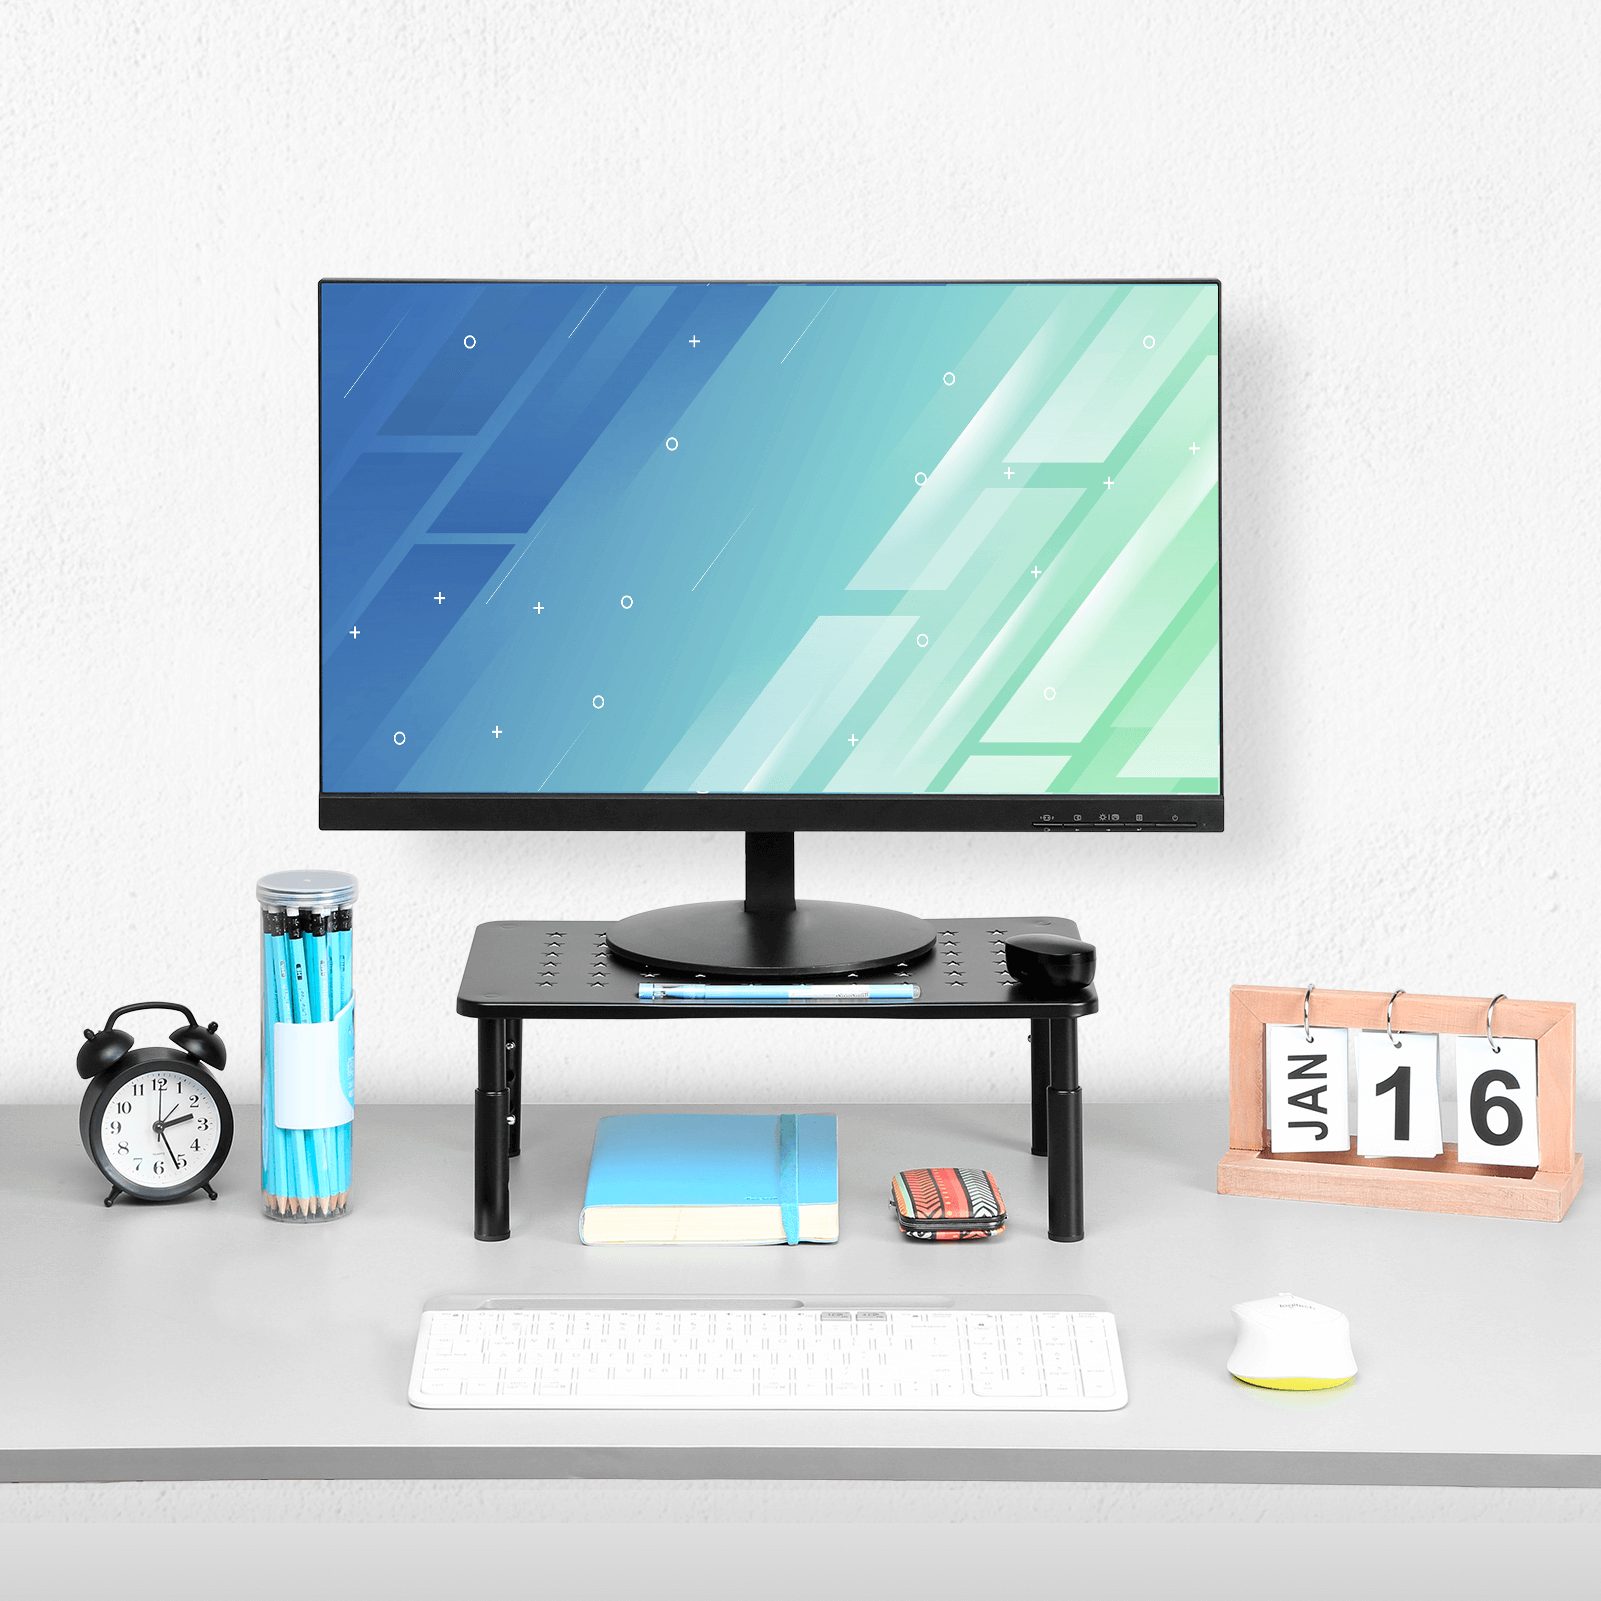 Zimilar stand for computer monitor